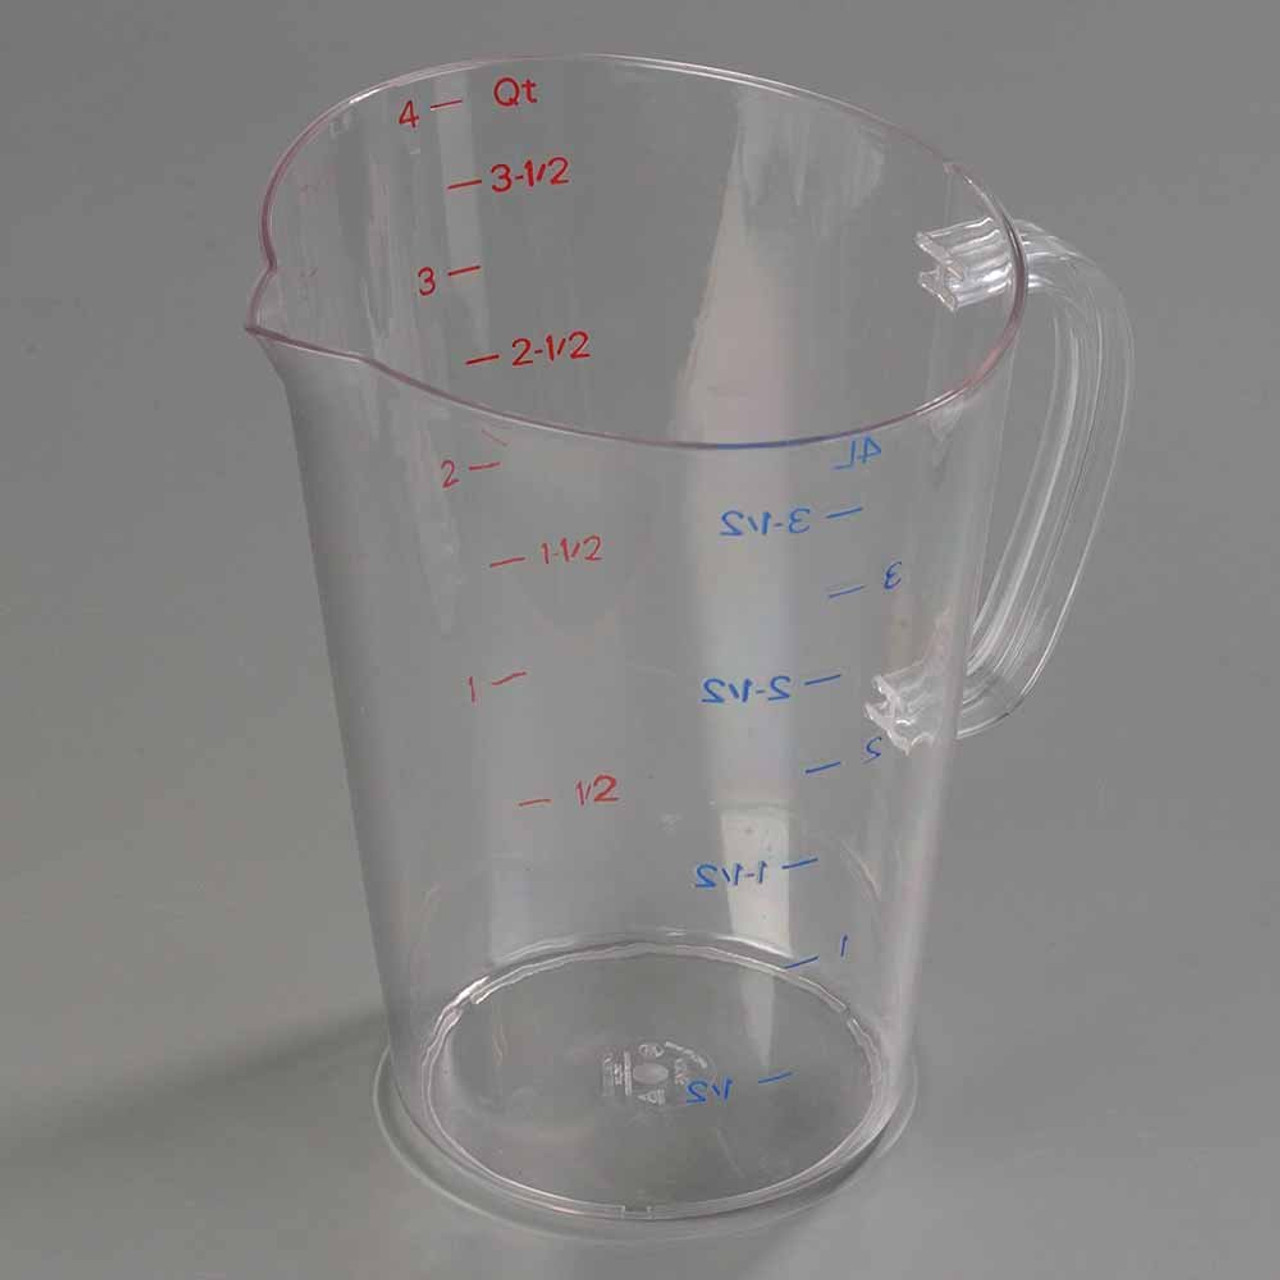 UNIVERSAL MEASURING CUP IDEALE